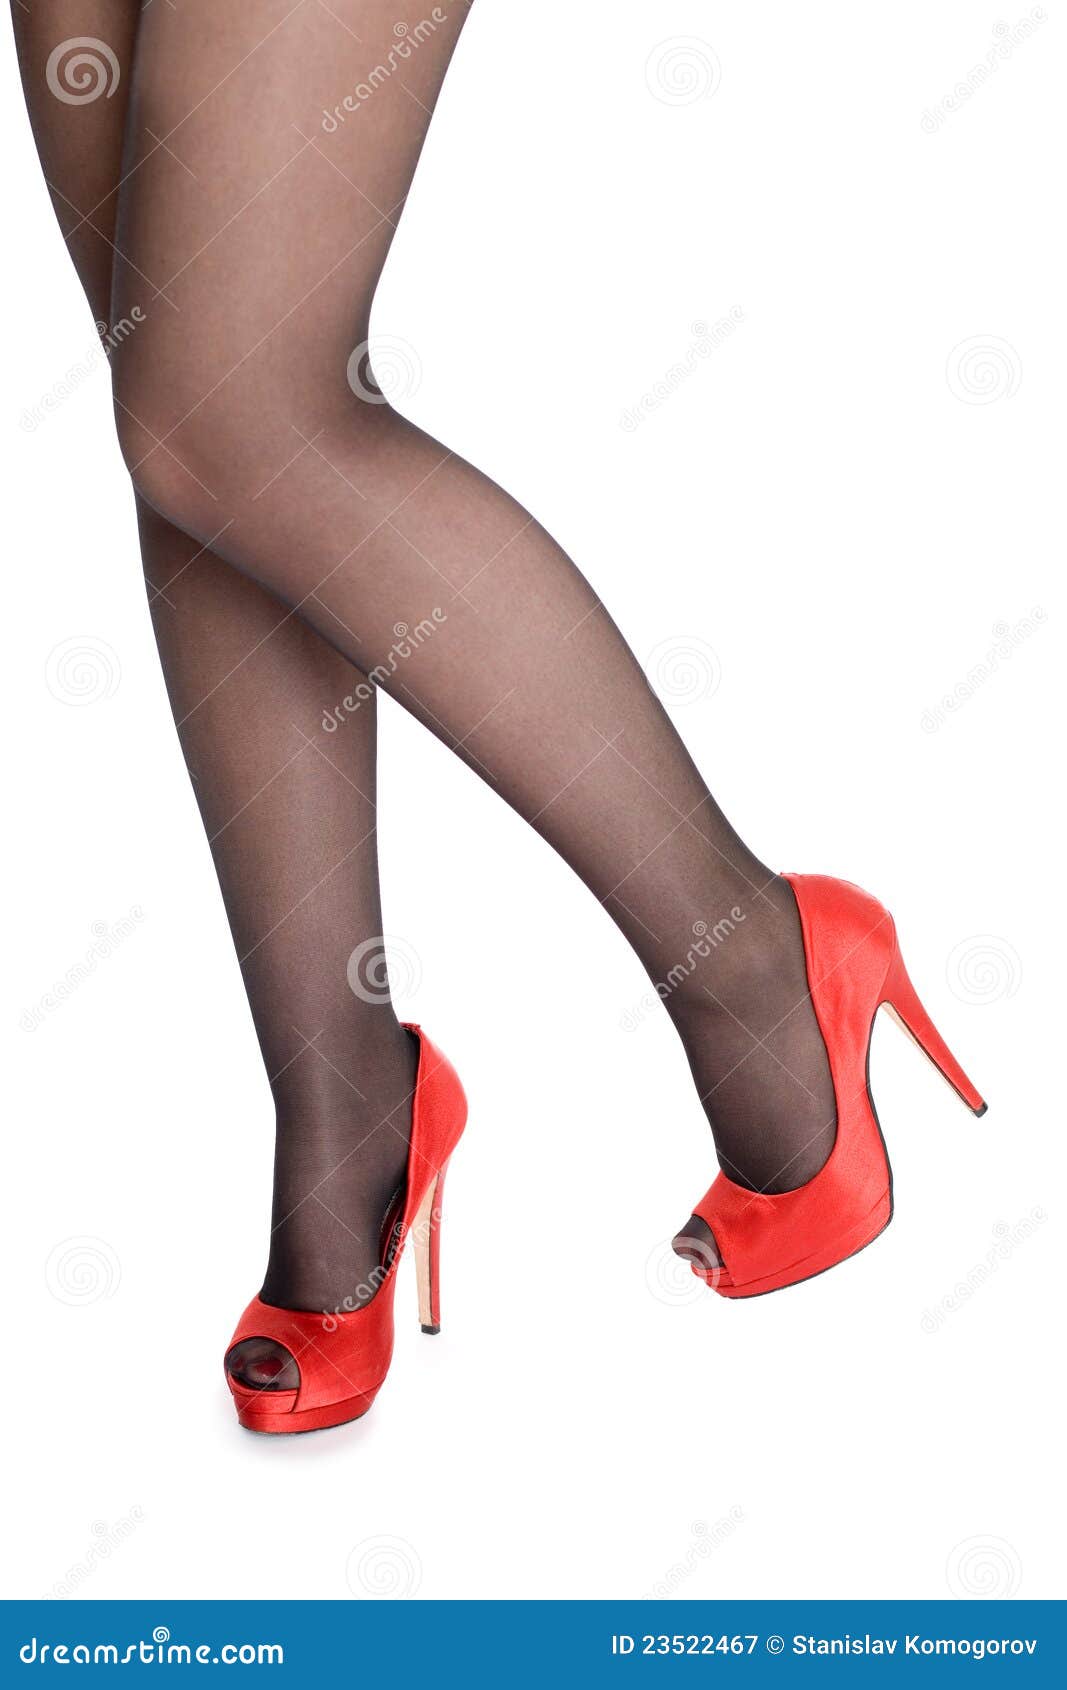 Legs in Pantyhose and Shoes. Stock Image - Image of fashionable, shoes:  23522467